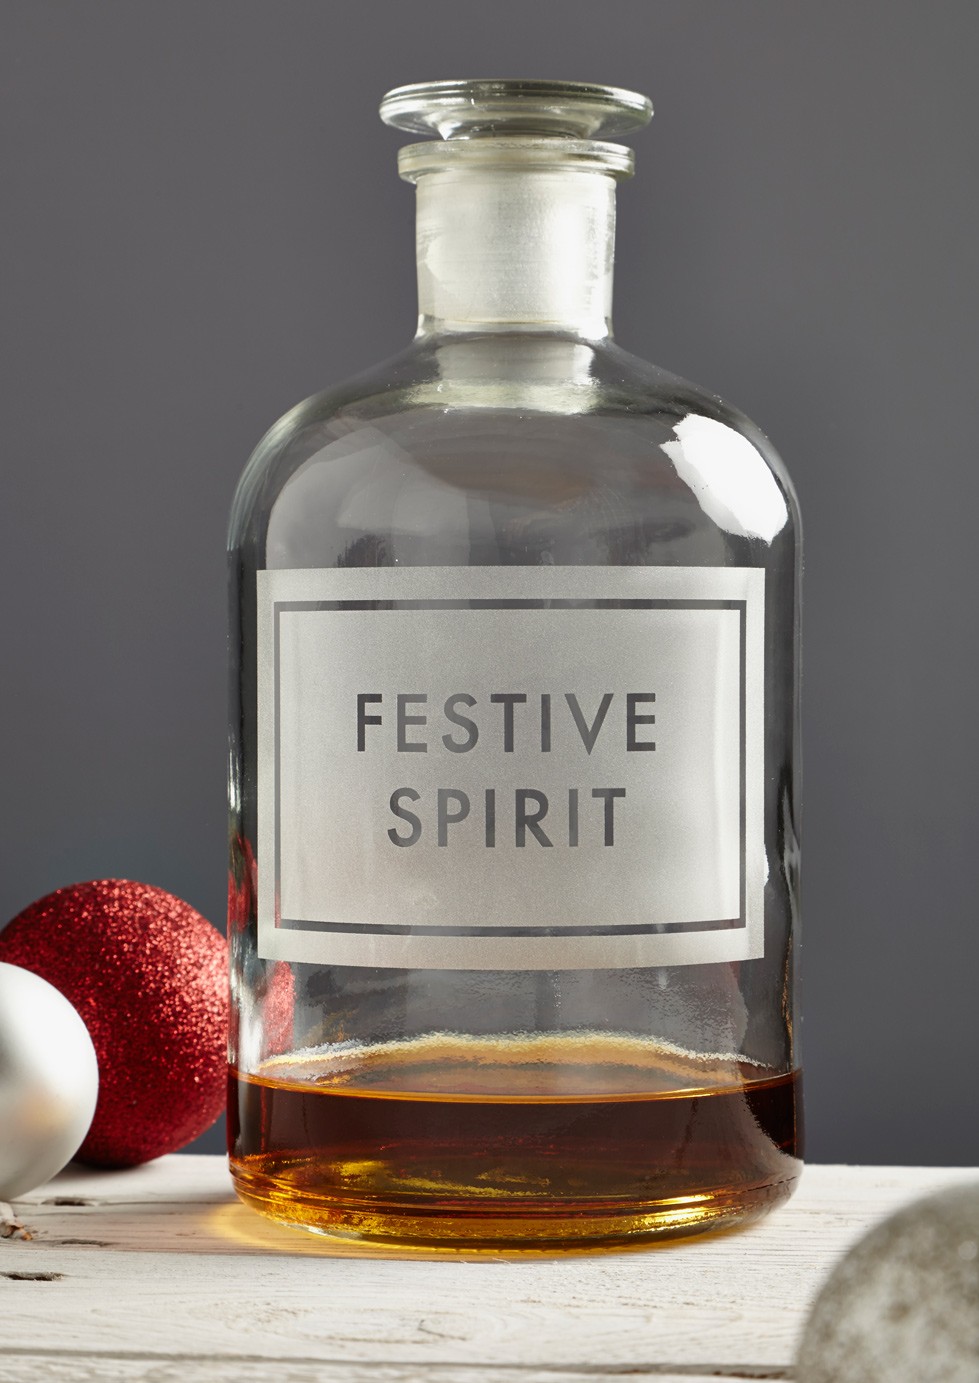 festive spirit etched apothecary bottle from limelace.co.uk